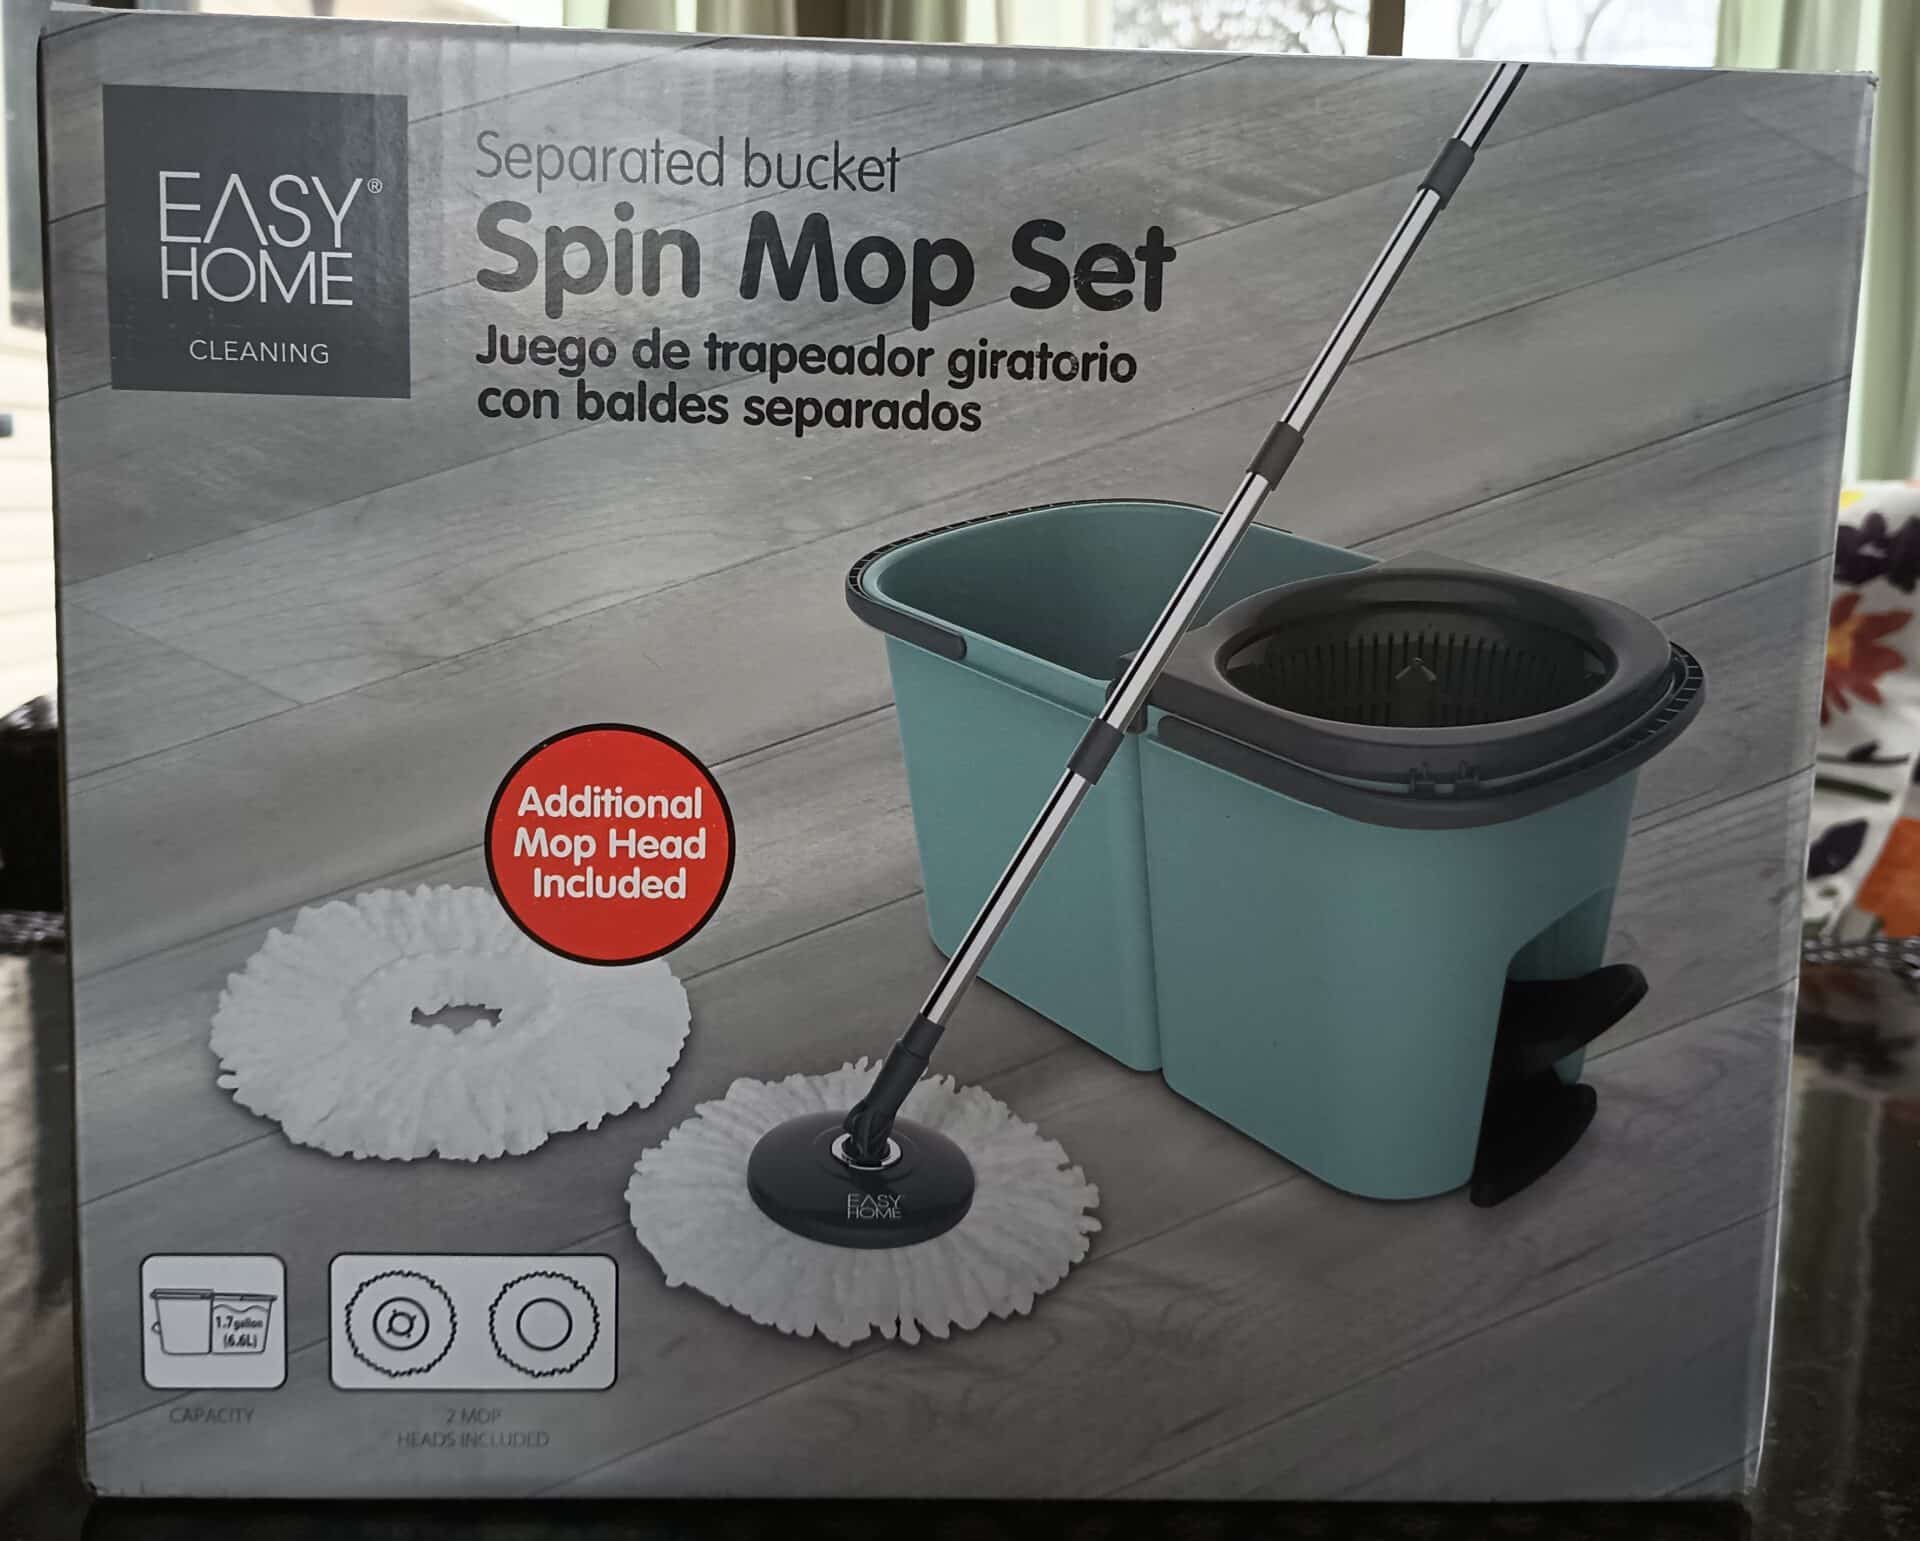 Spin Mop No Hand Washing Household Floor Cleaning Mop Long Handle